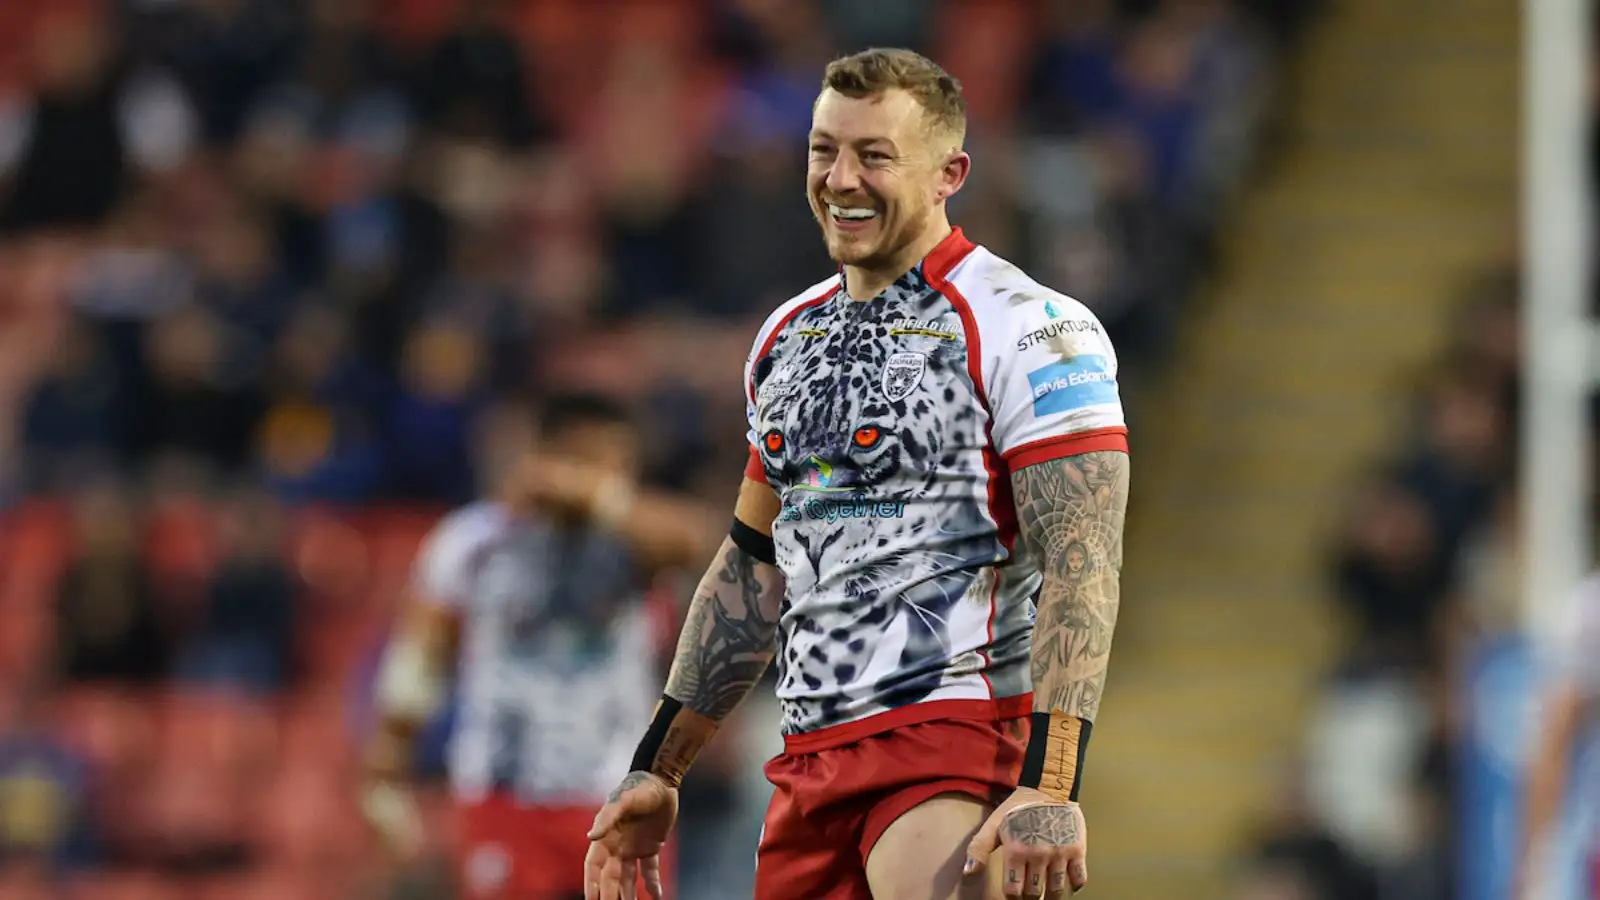 The not so secret weapon to Josh Charnley’s ‘outstanding’ start to 2023 despite England omission